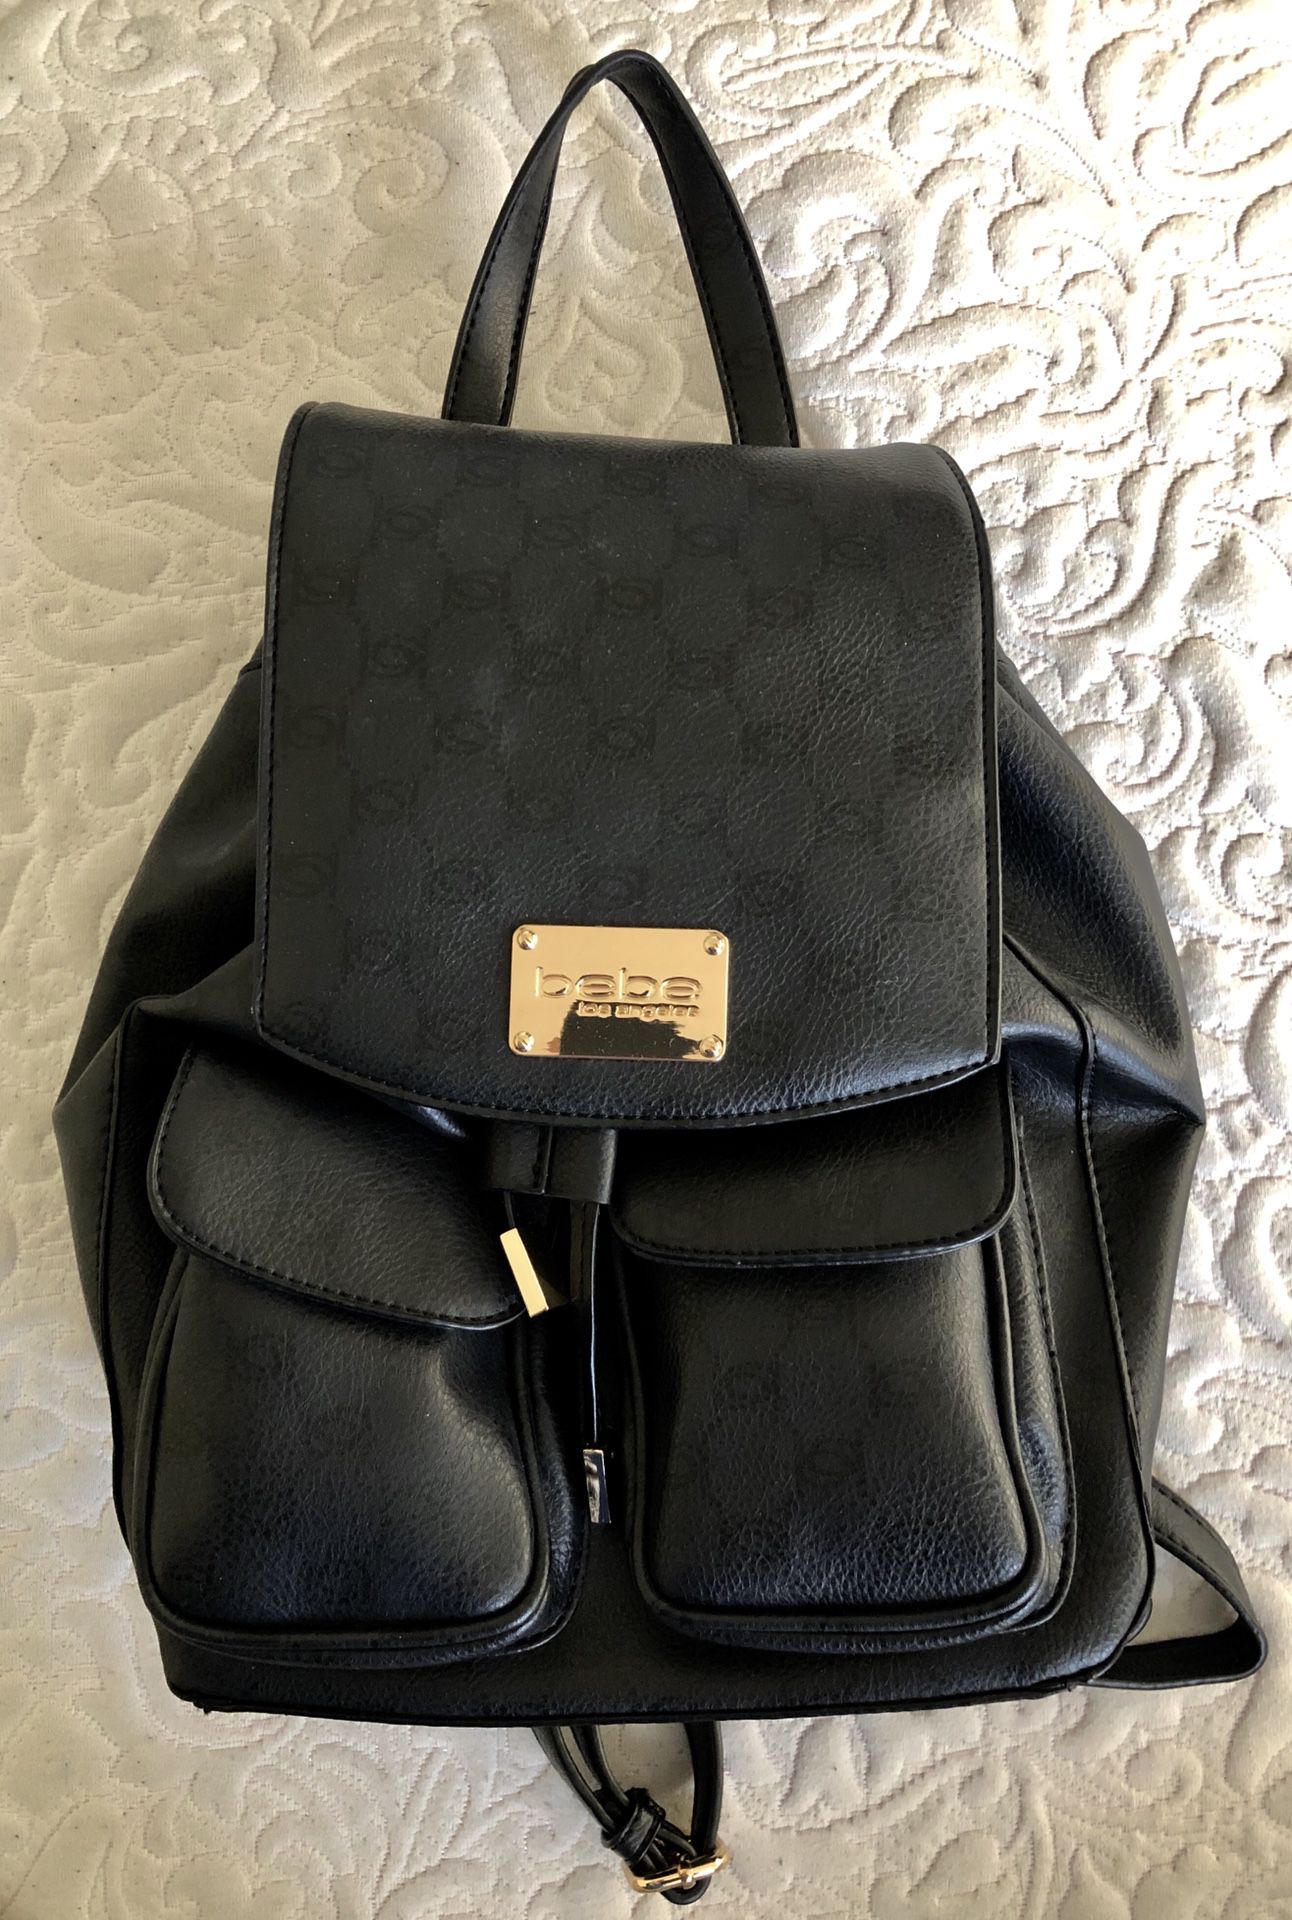 New Bebe Small Backpack